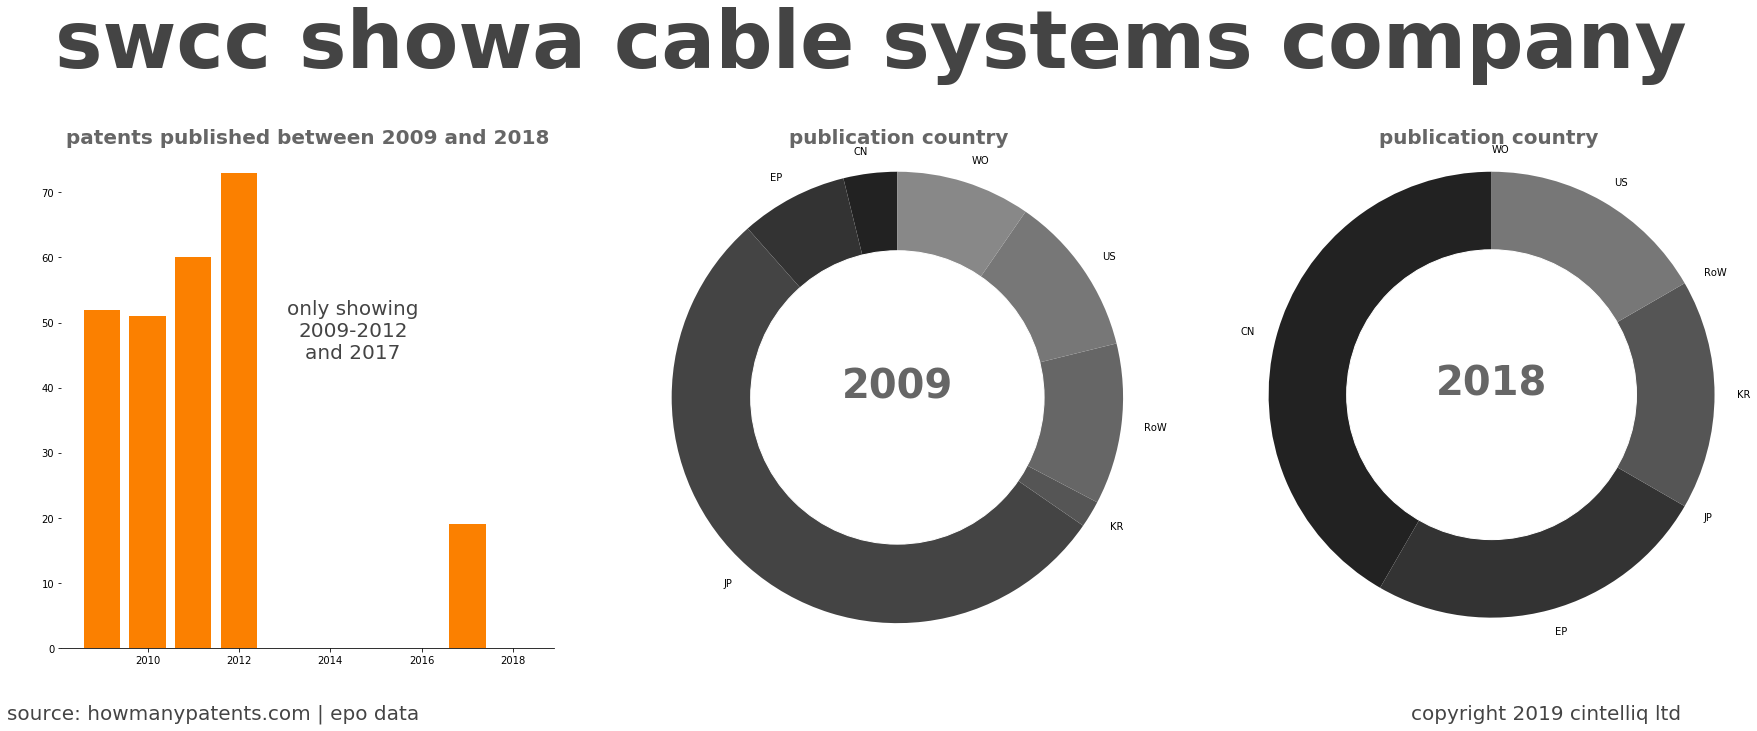 summary of patents for Swcc Showa Cable Systems Company